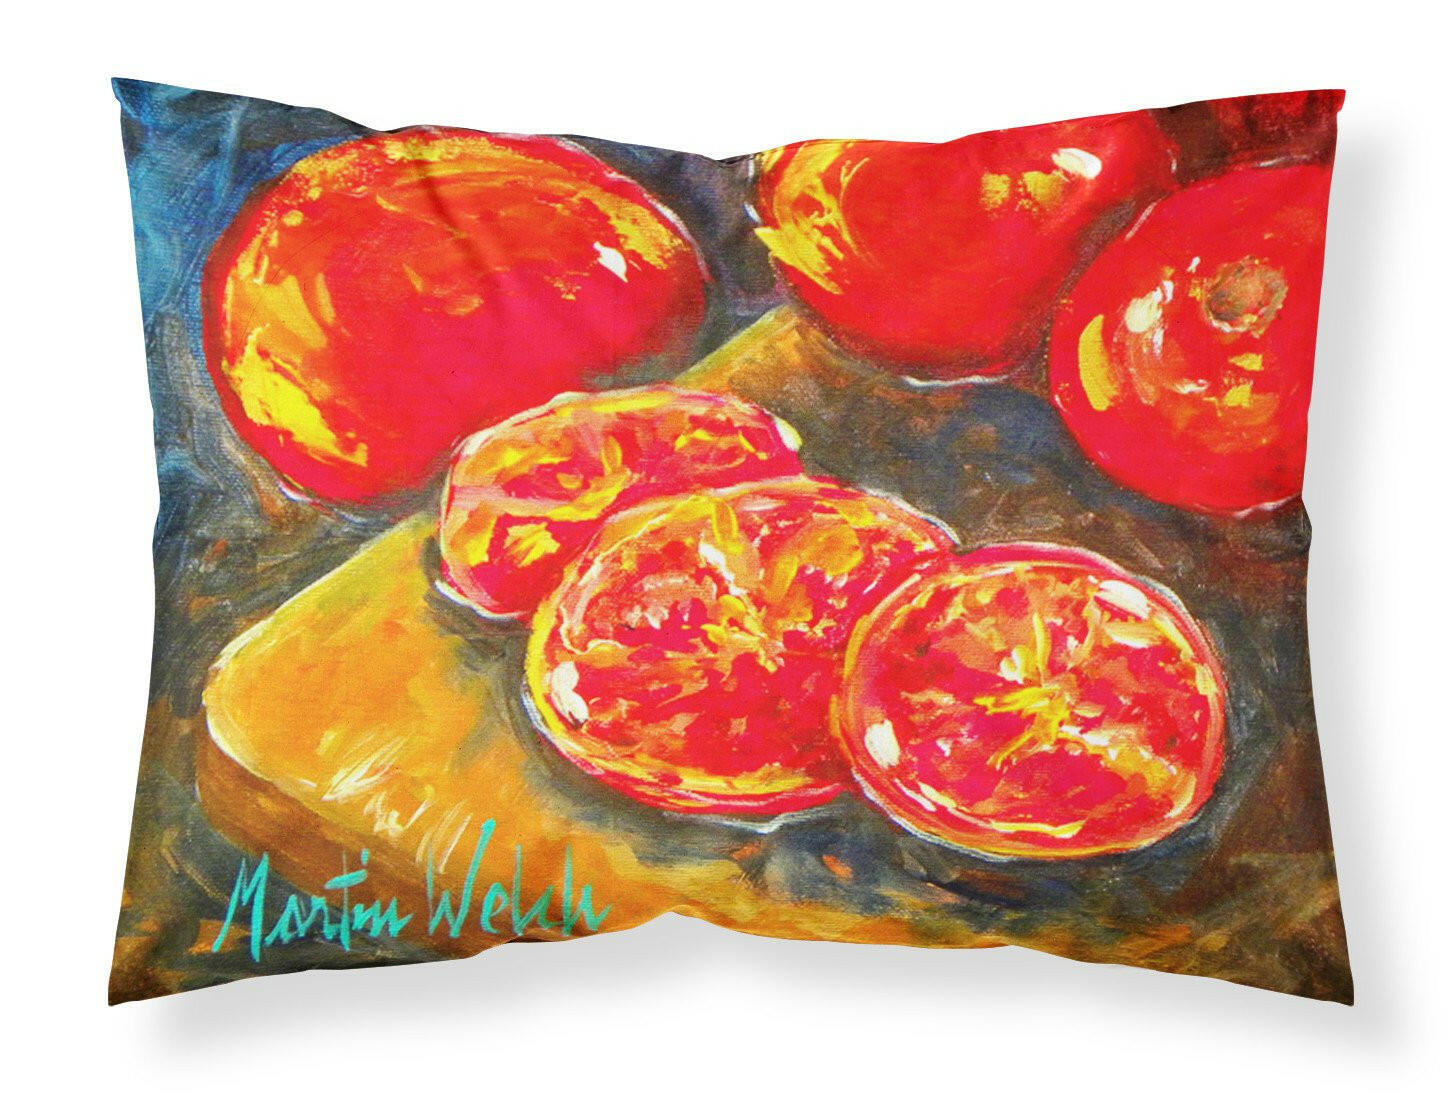 Vegetables - Tomatoes Slice It Up Moisture wicking Fabric standard pillowcase by Caroline's Treasures